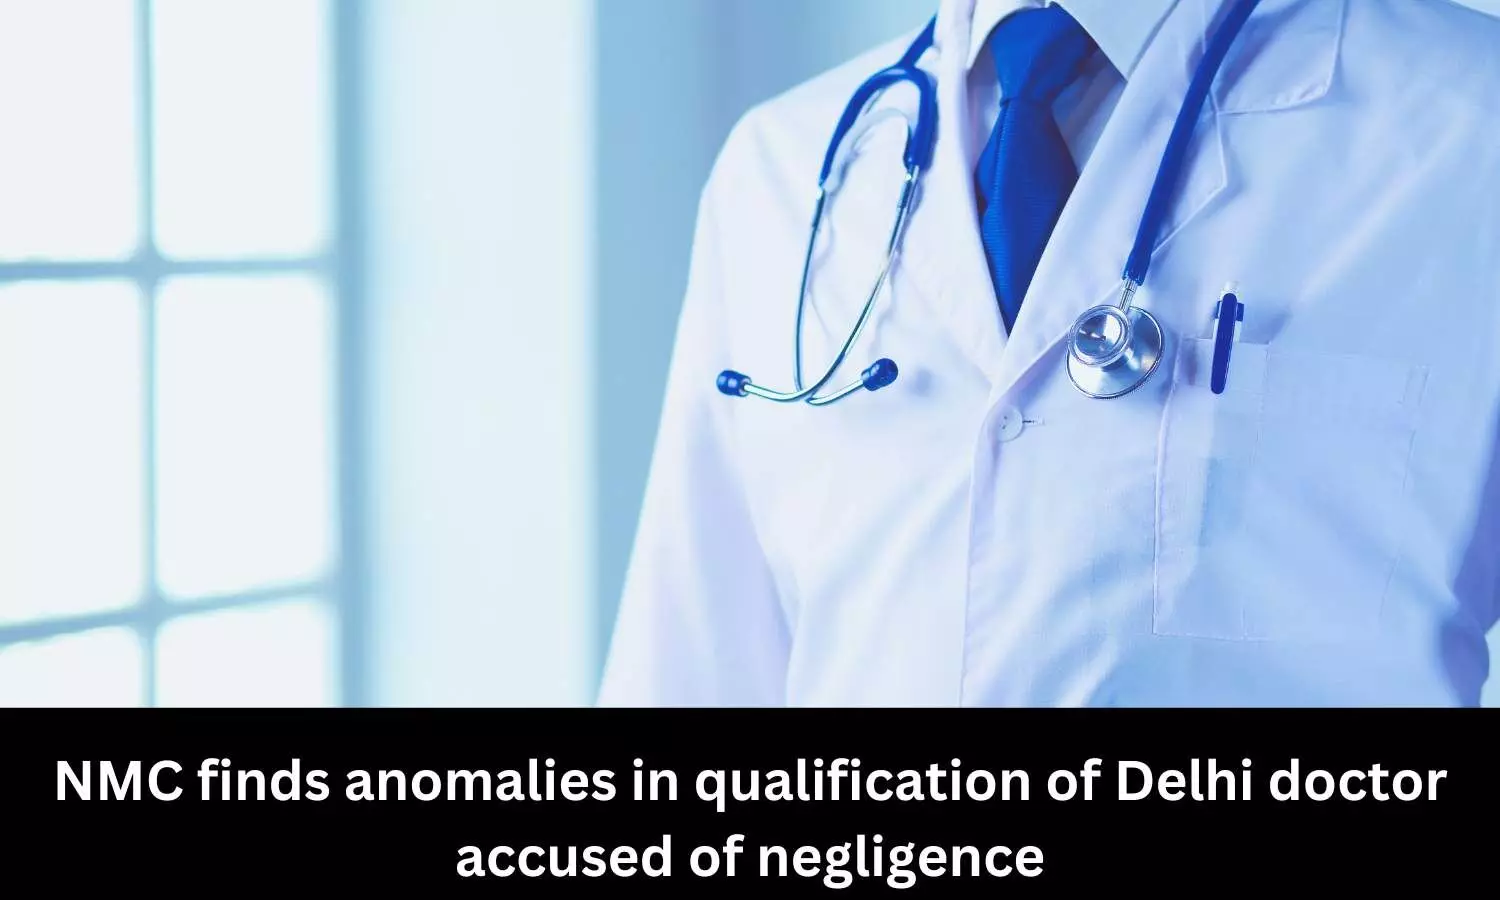 NMC finds anomalies in qualification of Delhi doctor accused of negligence